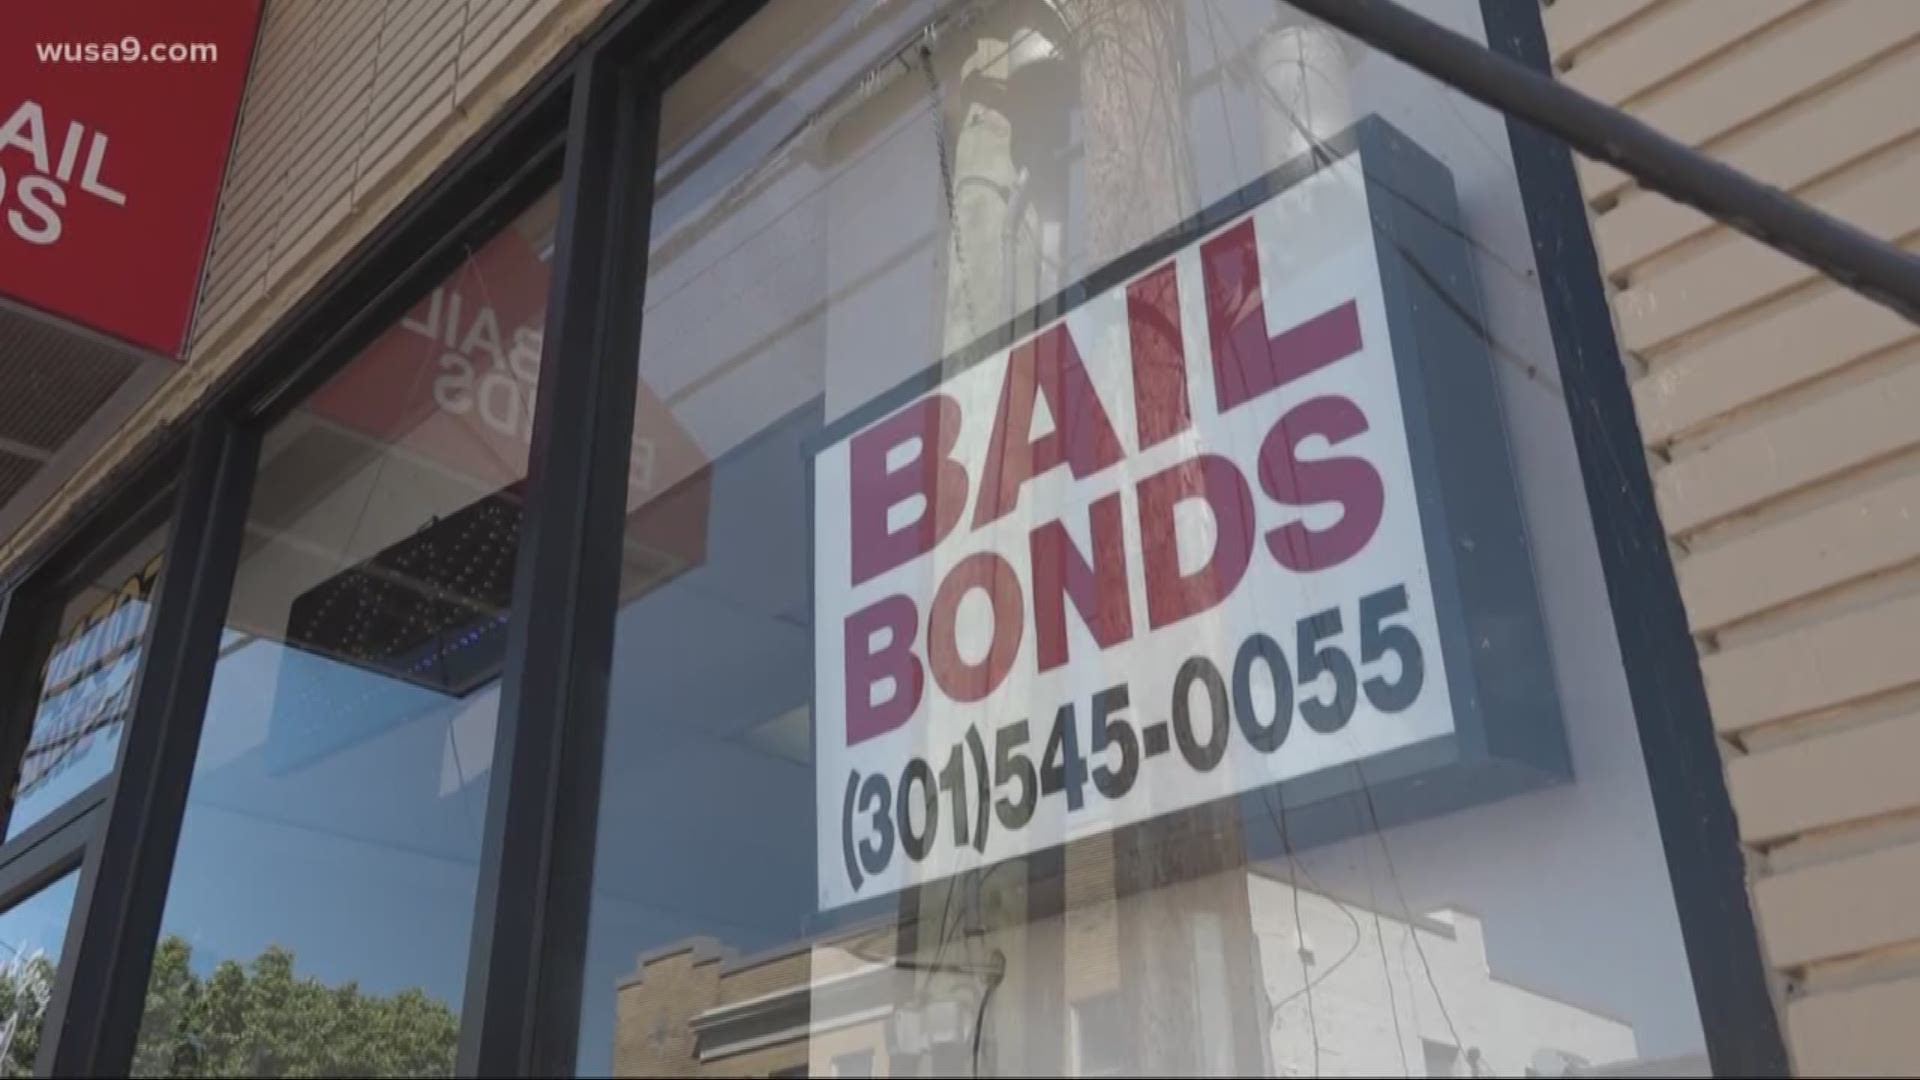 'They're the porch bandits.They're the people breaking into cars and stealing your tires,' warned DC/Maryland Bail Bondsmen Association President Sol Hamilton III.